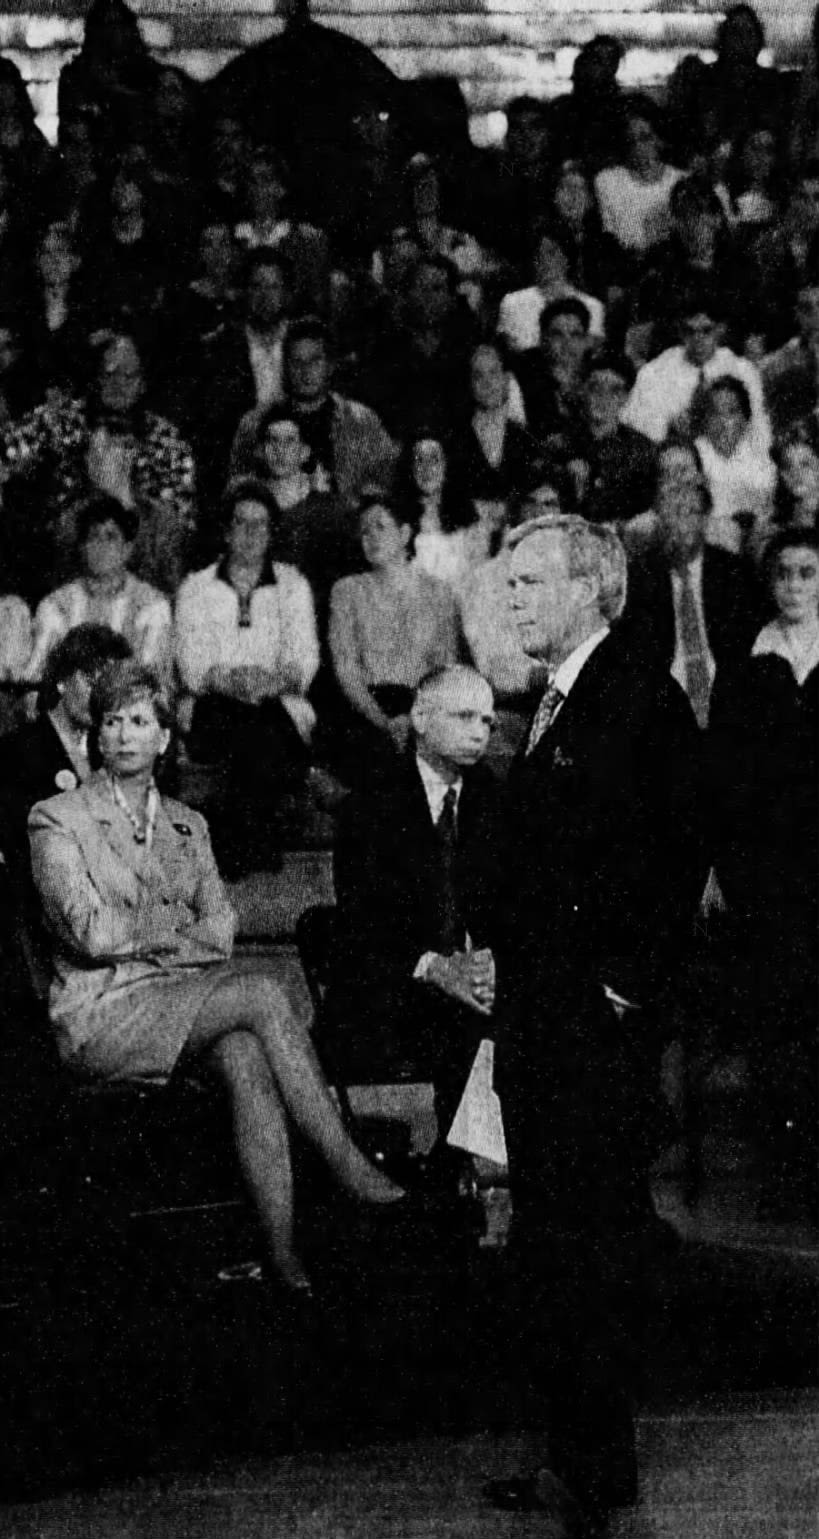 Brokaw, more, talk about Columbine: This week in Central Jersey history, April 22-28